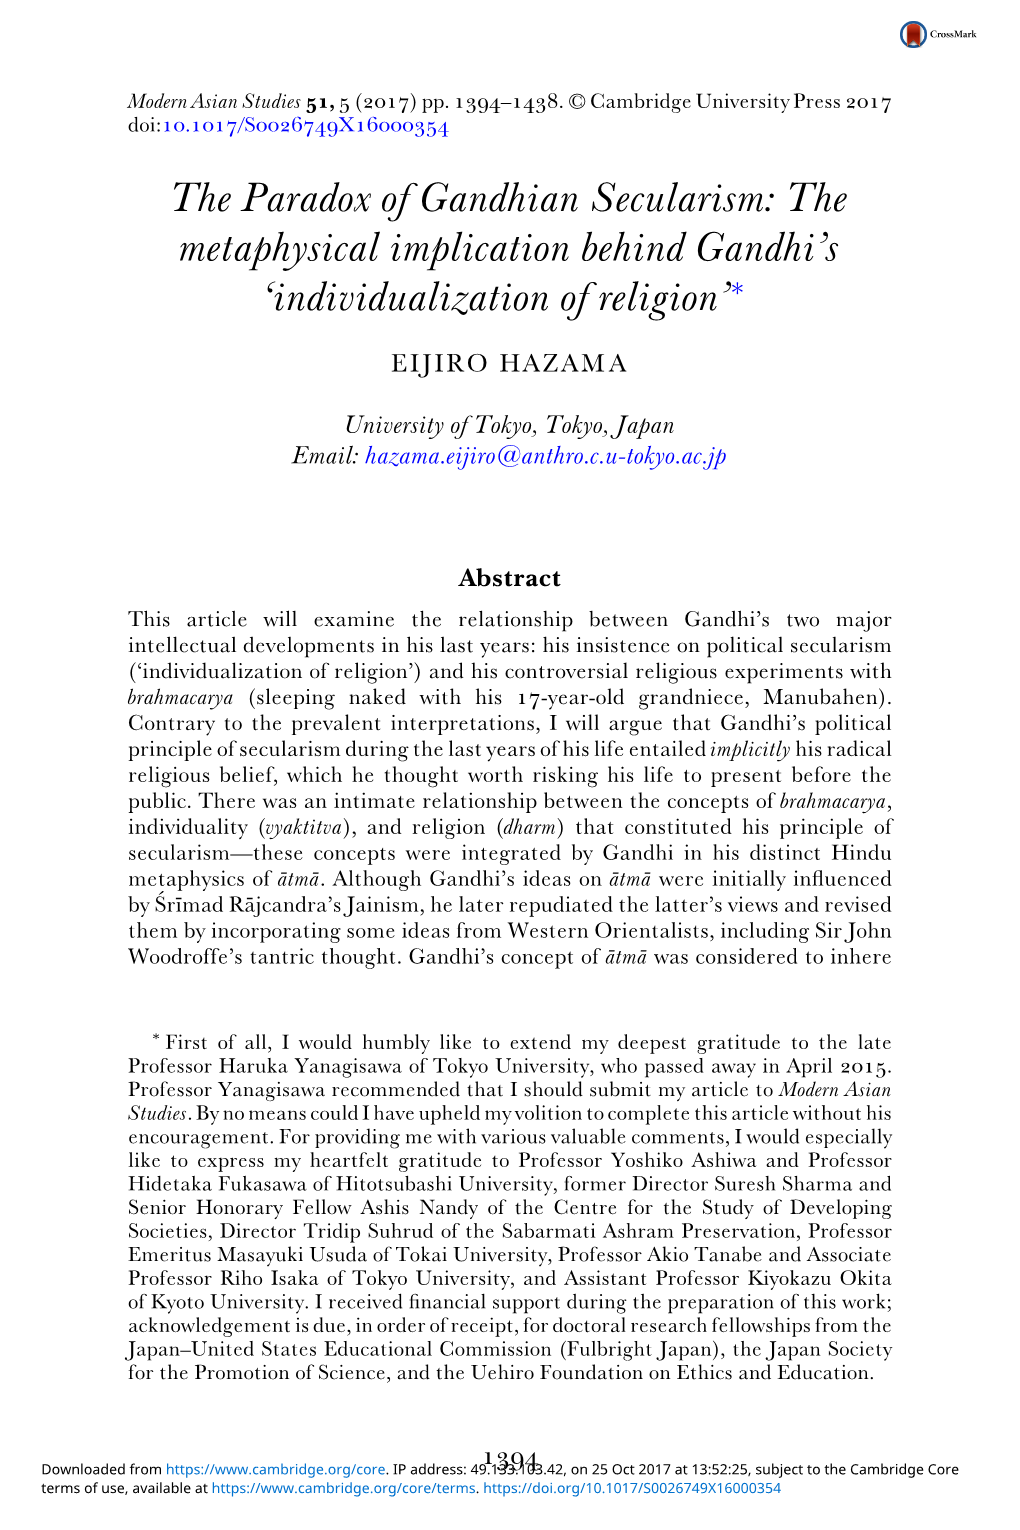 The Paradox of Gandhian Secularism: the Metaphysical Implication Behind Gandhi’S ‘Individualization of Religion’∗